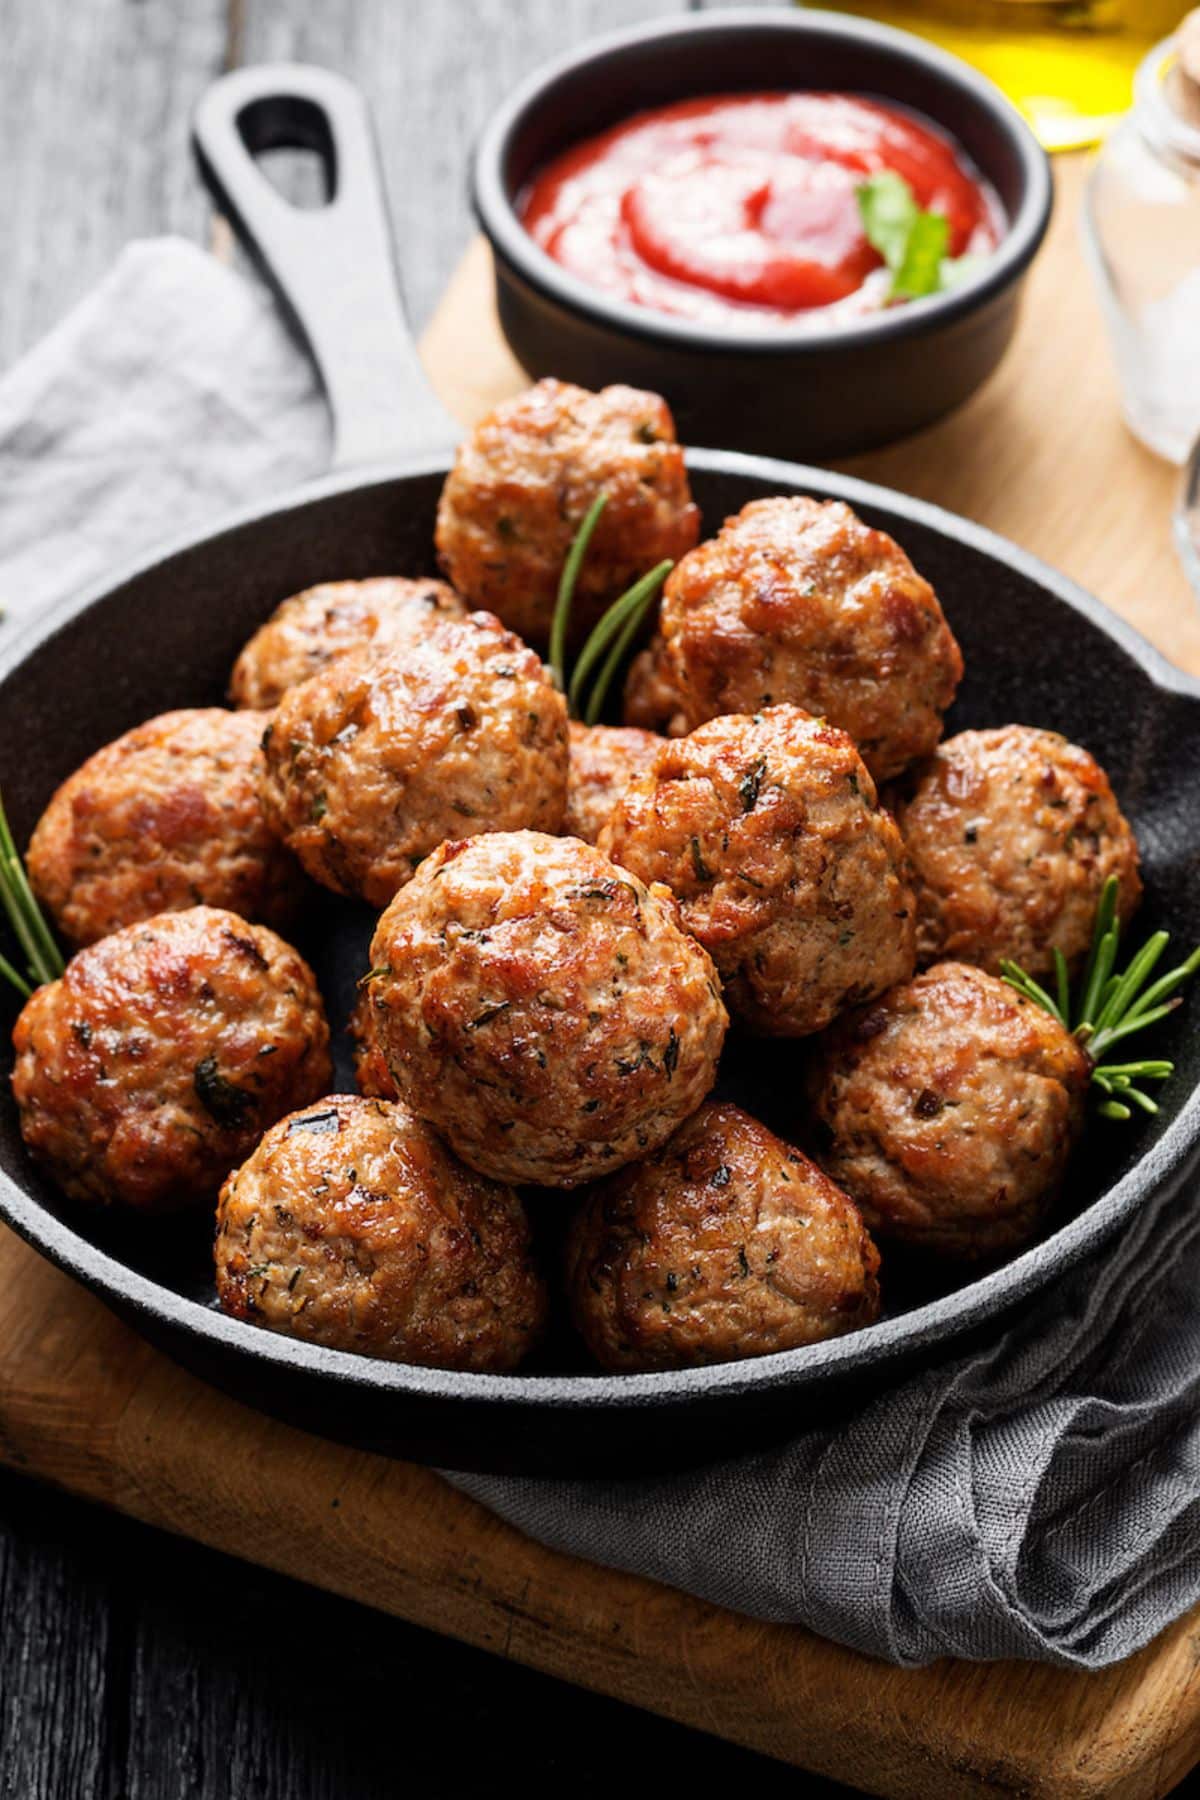 skillet with dairy free meatballs ready to eat.